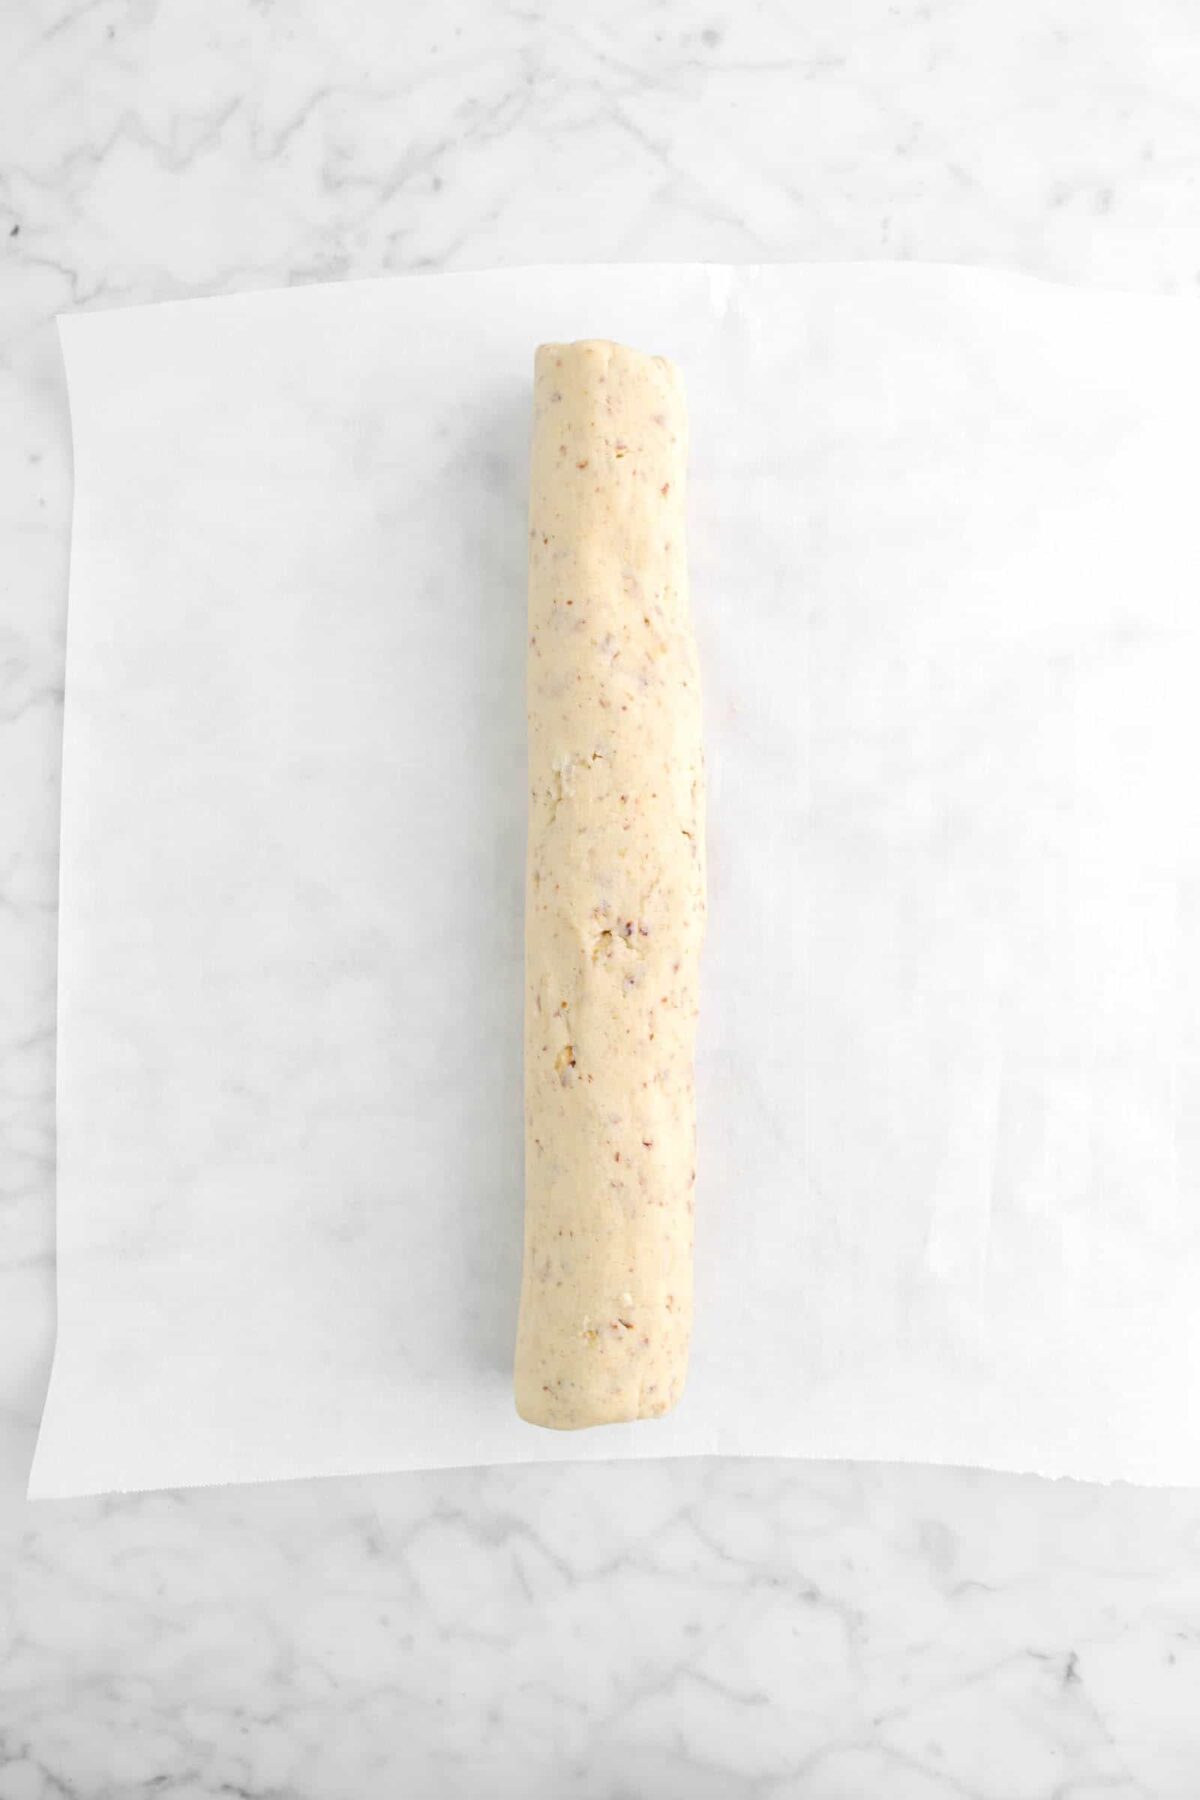 cookie dough rolled into a log on parchment paper